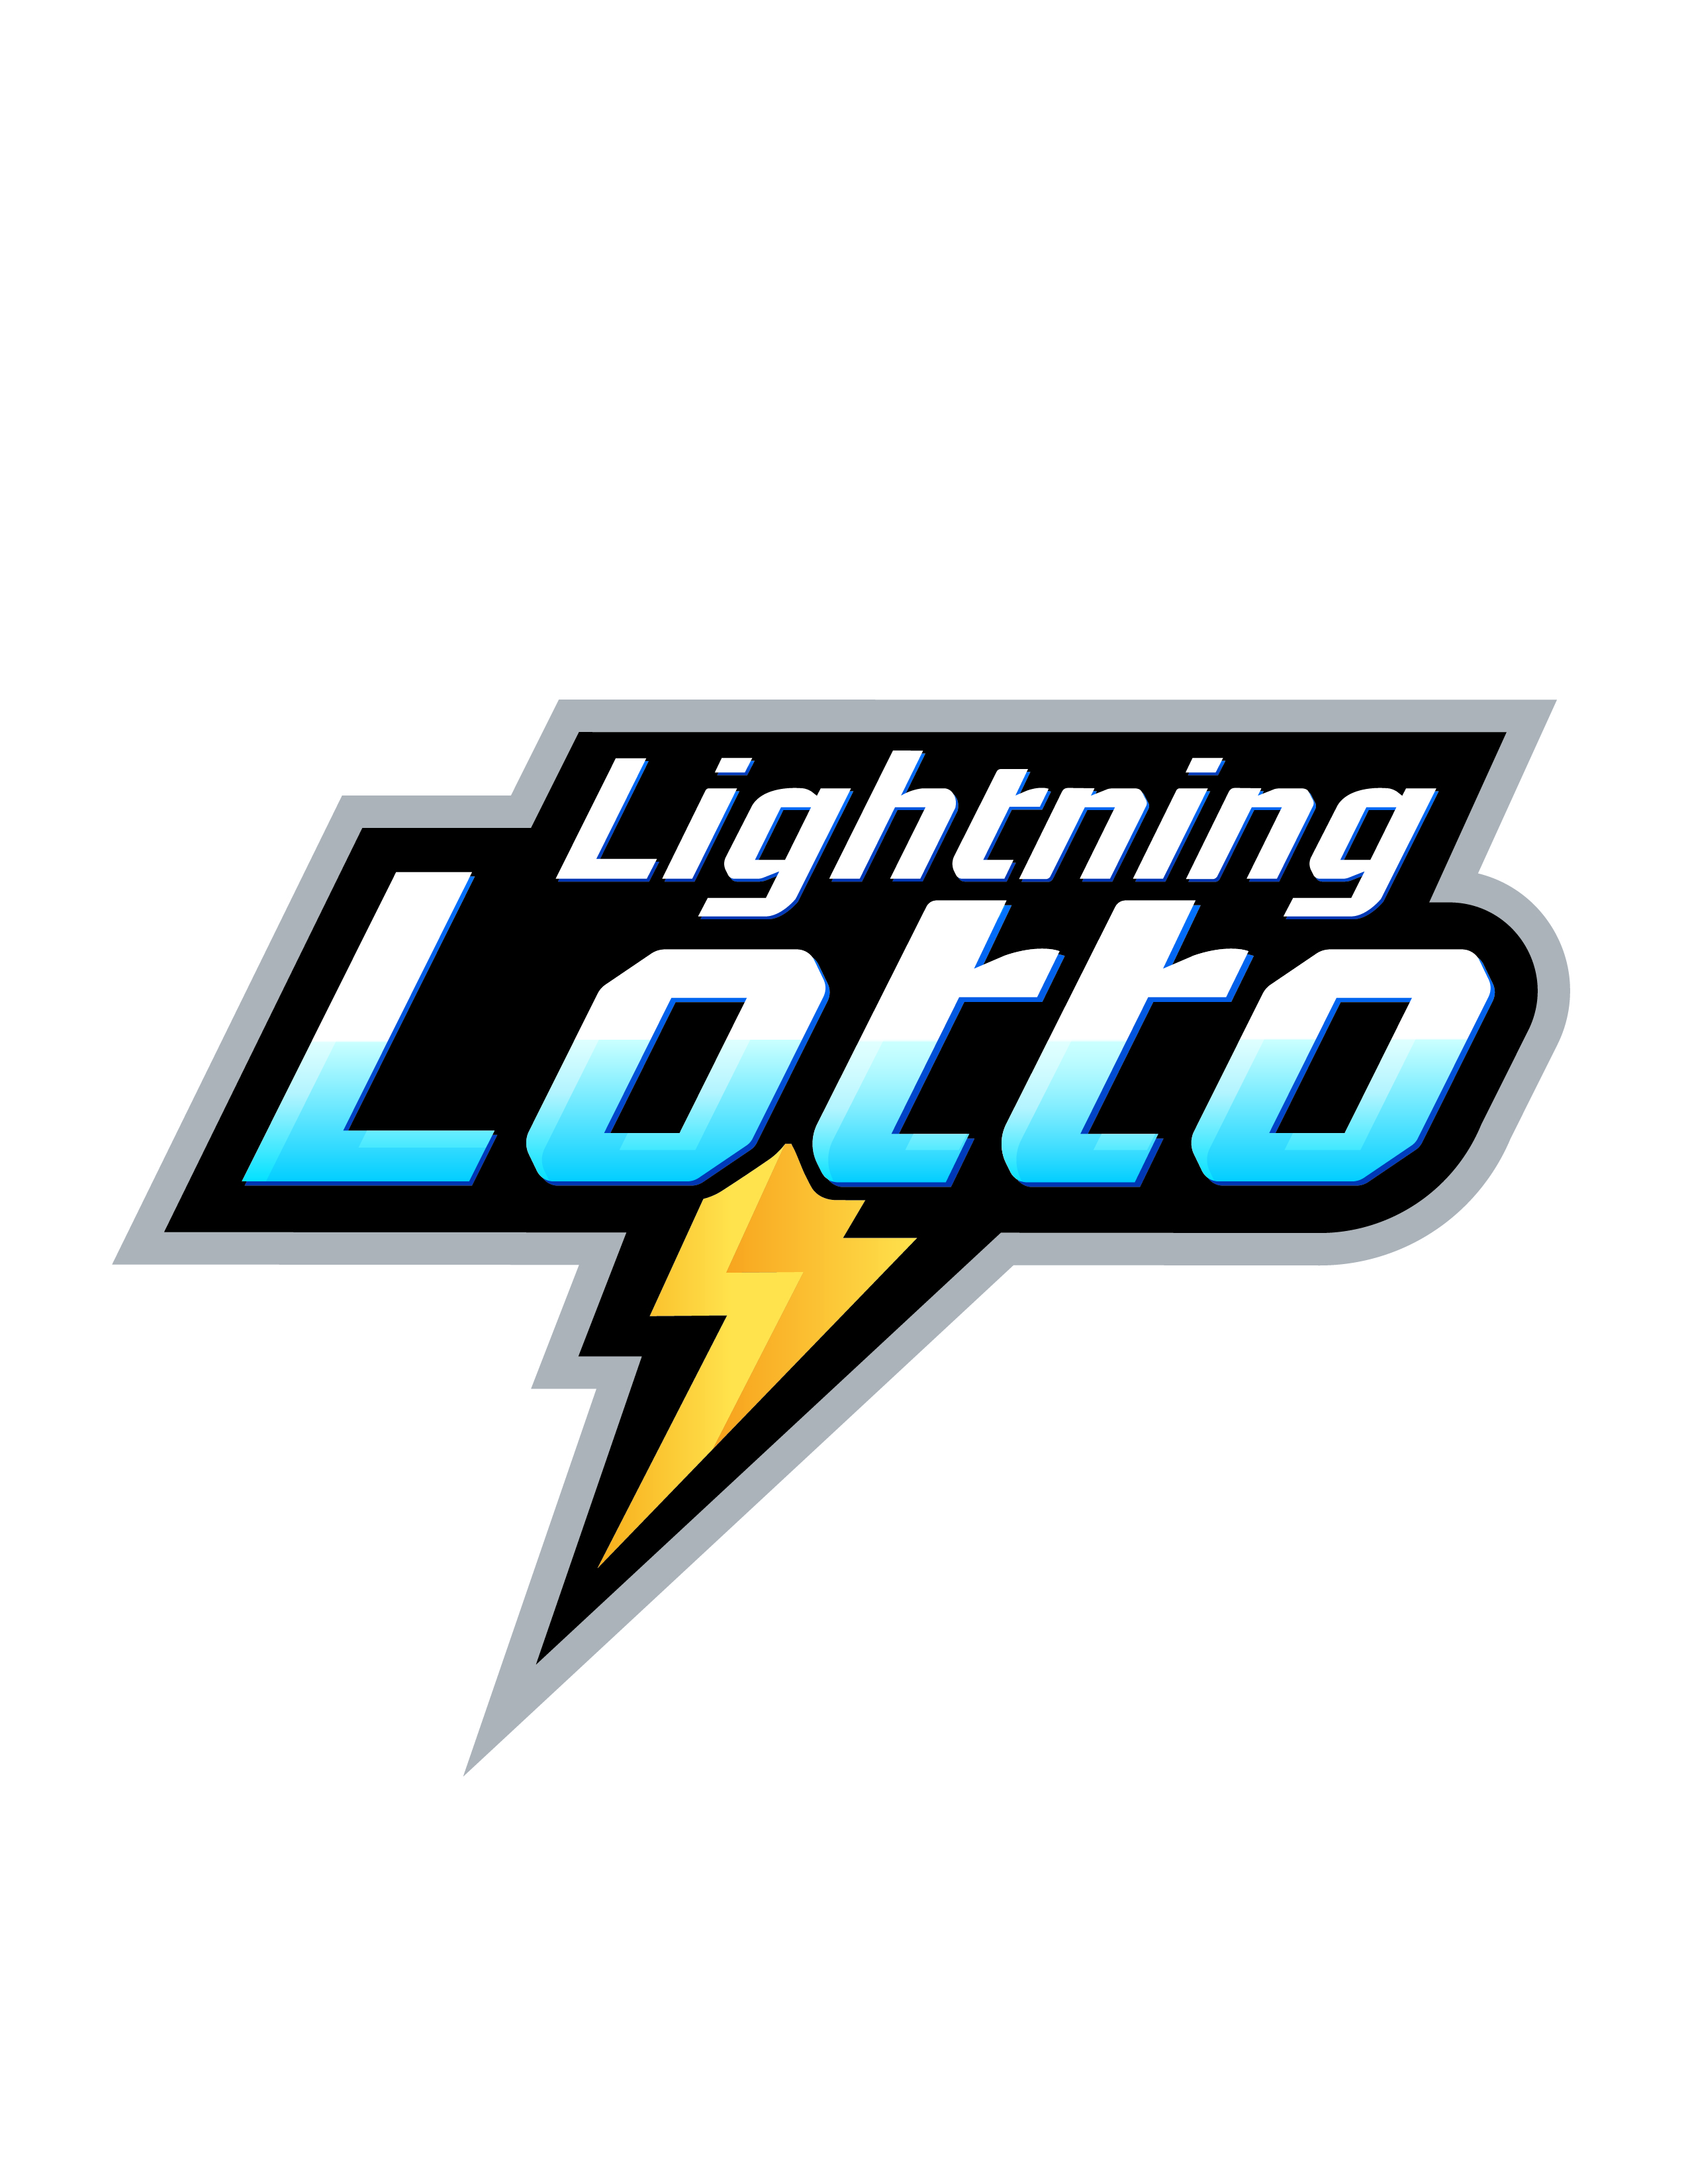 HAVE JOLTS OF FUN WITH NEW LIGHTNING LOTTO!